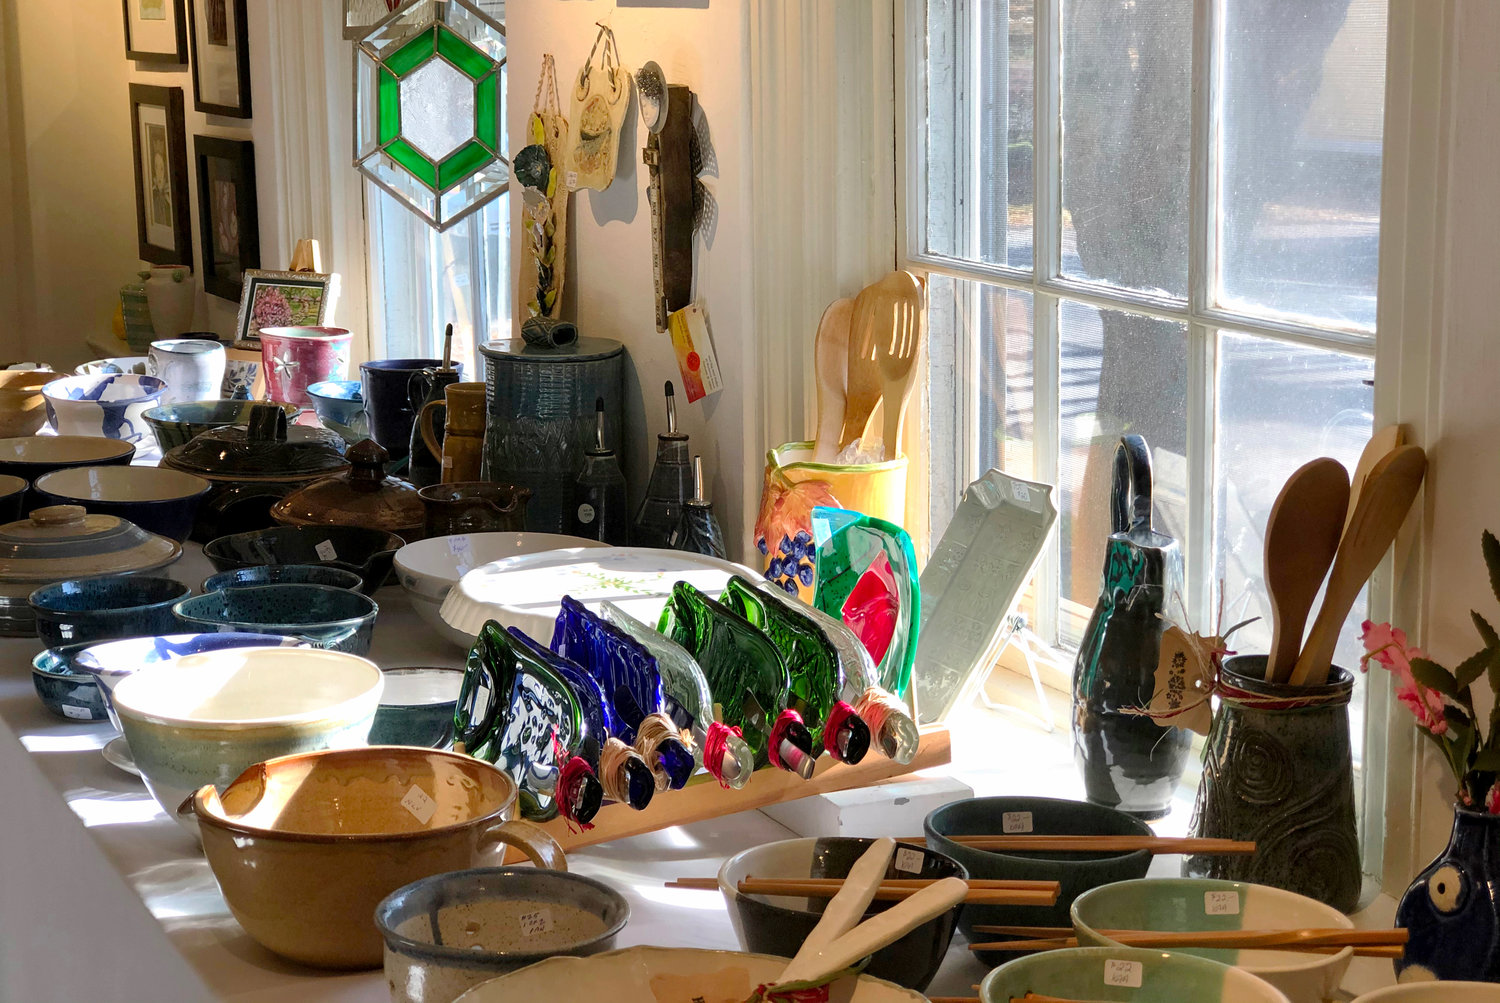 South County Art Association’s Holiday Pottery and Art Sale